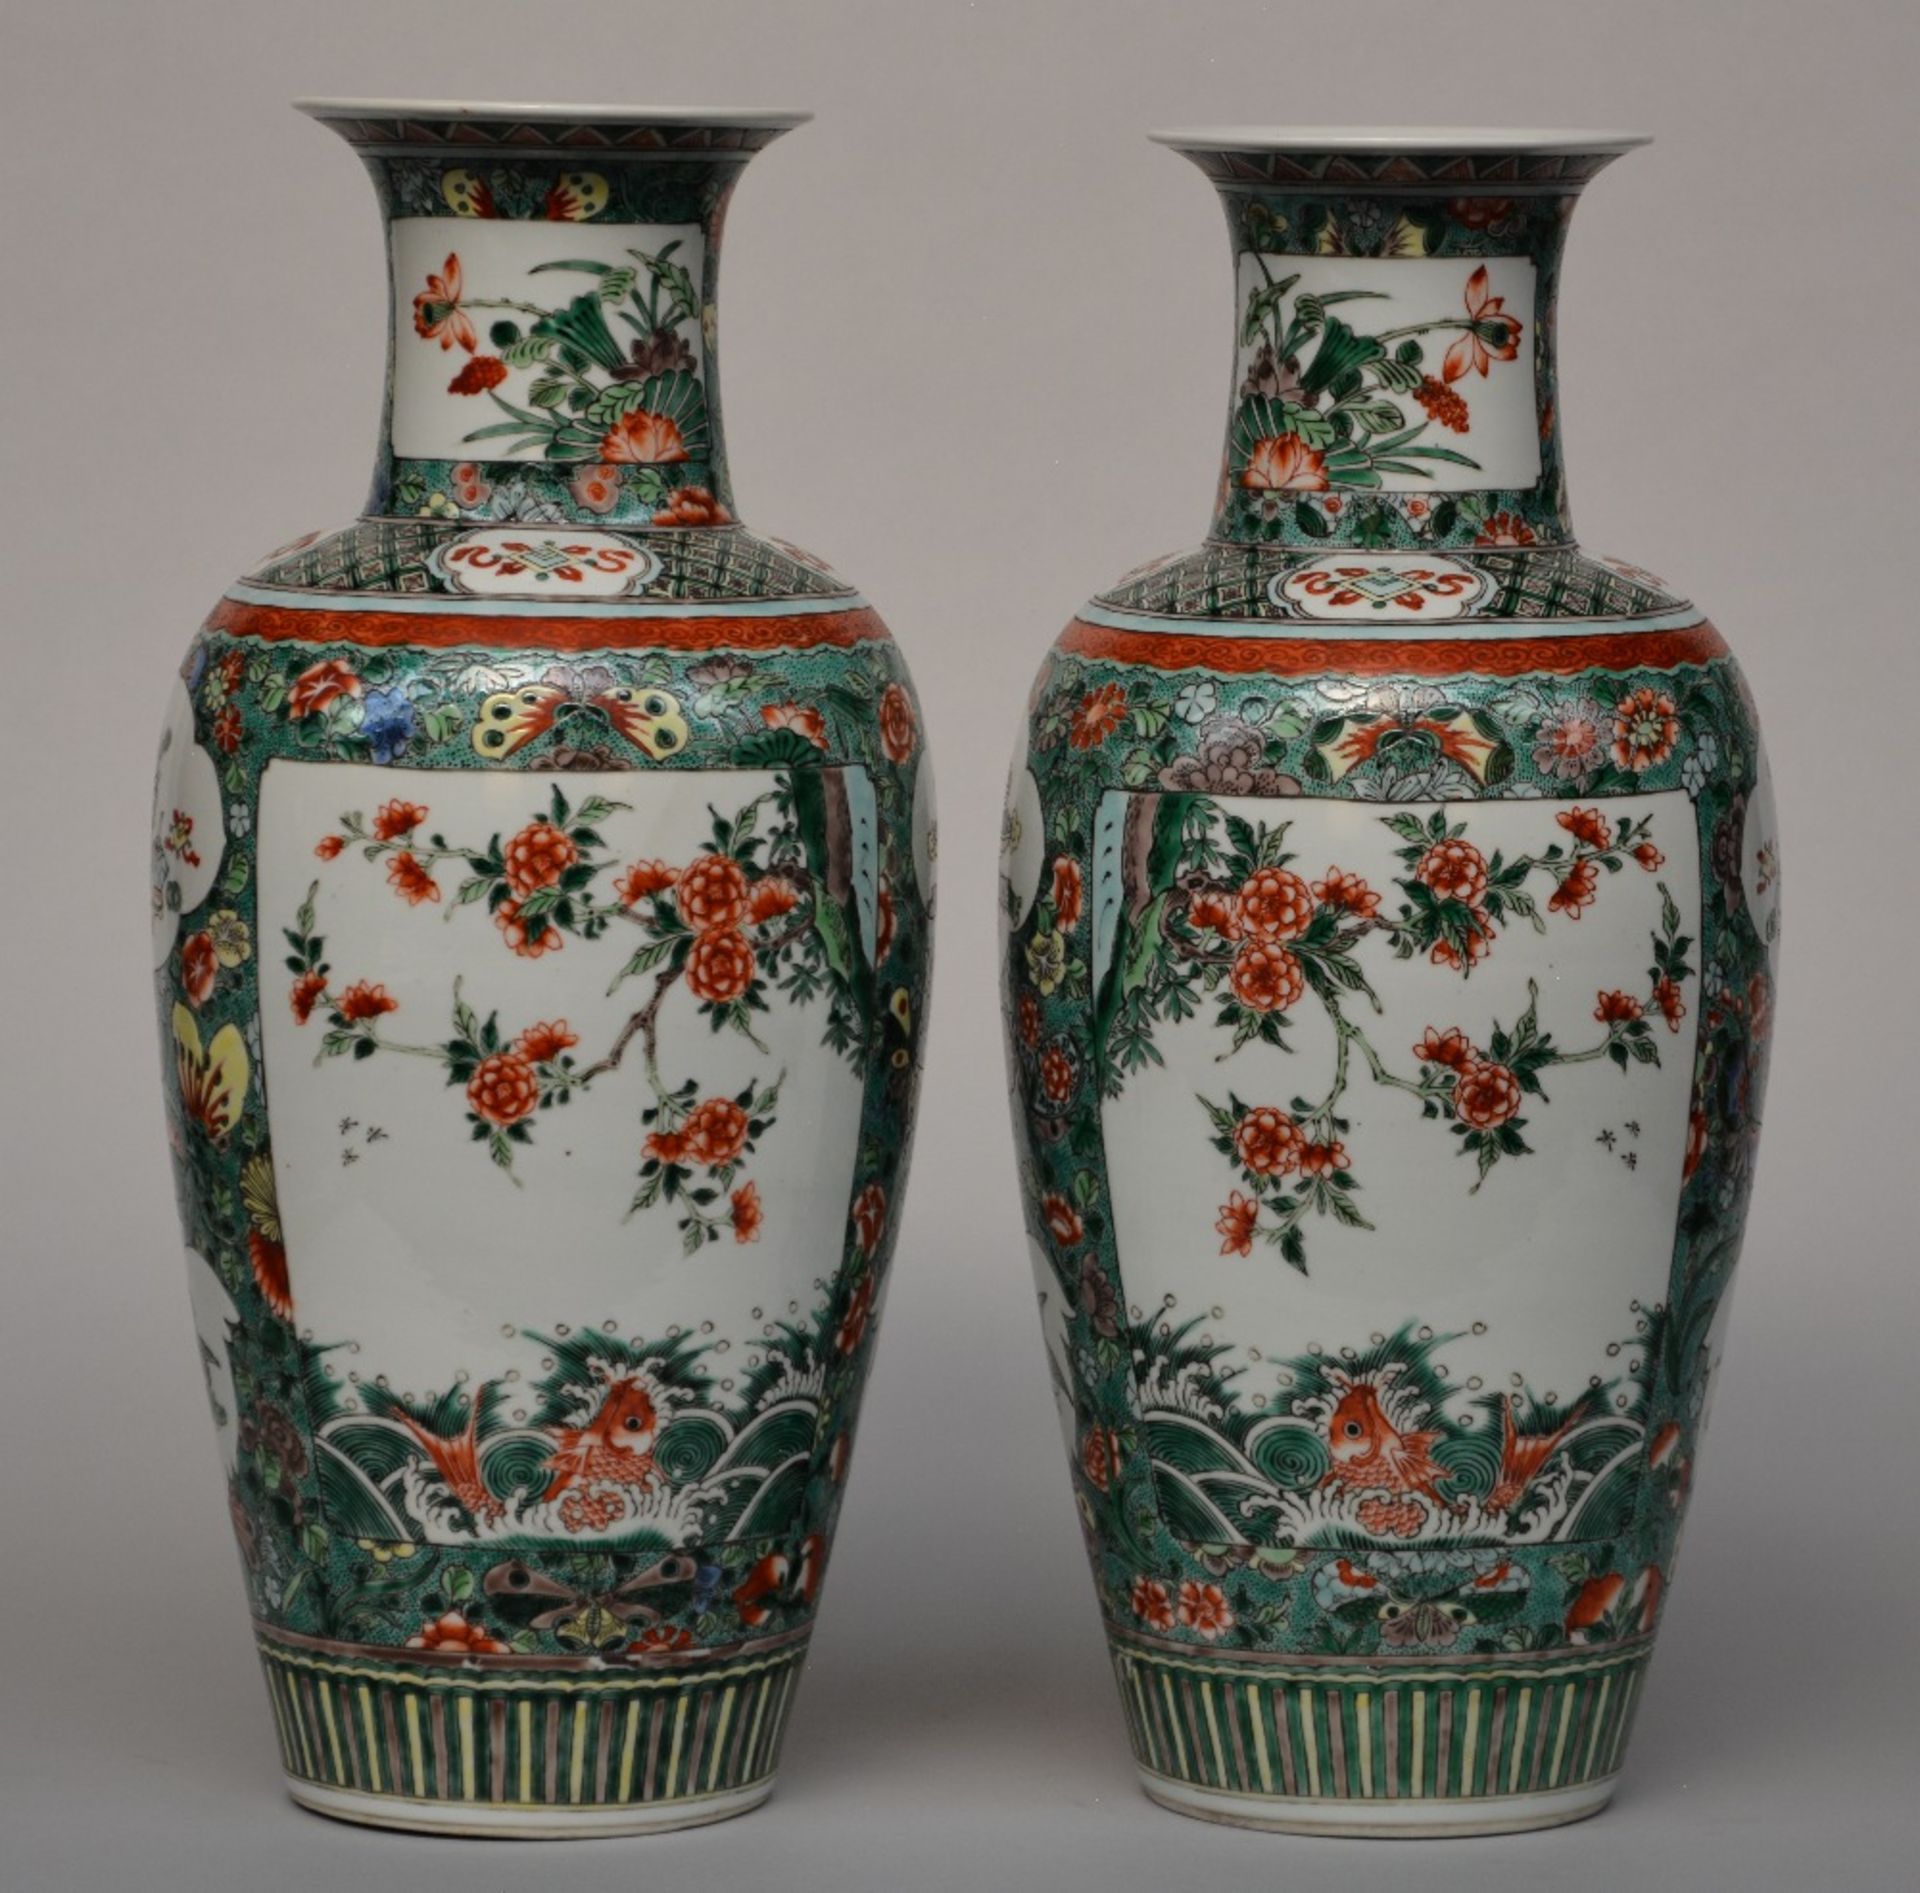 A pair of Chinese famille verte vases decorated with floral motifs, fish and a dragon, H 45 - 45,5 - Image 3 of 6